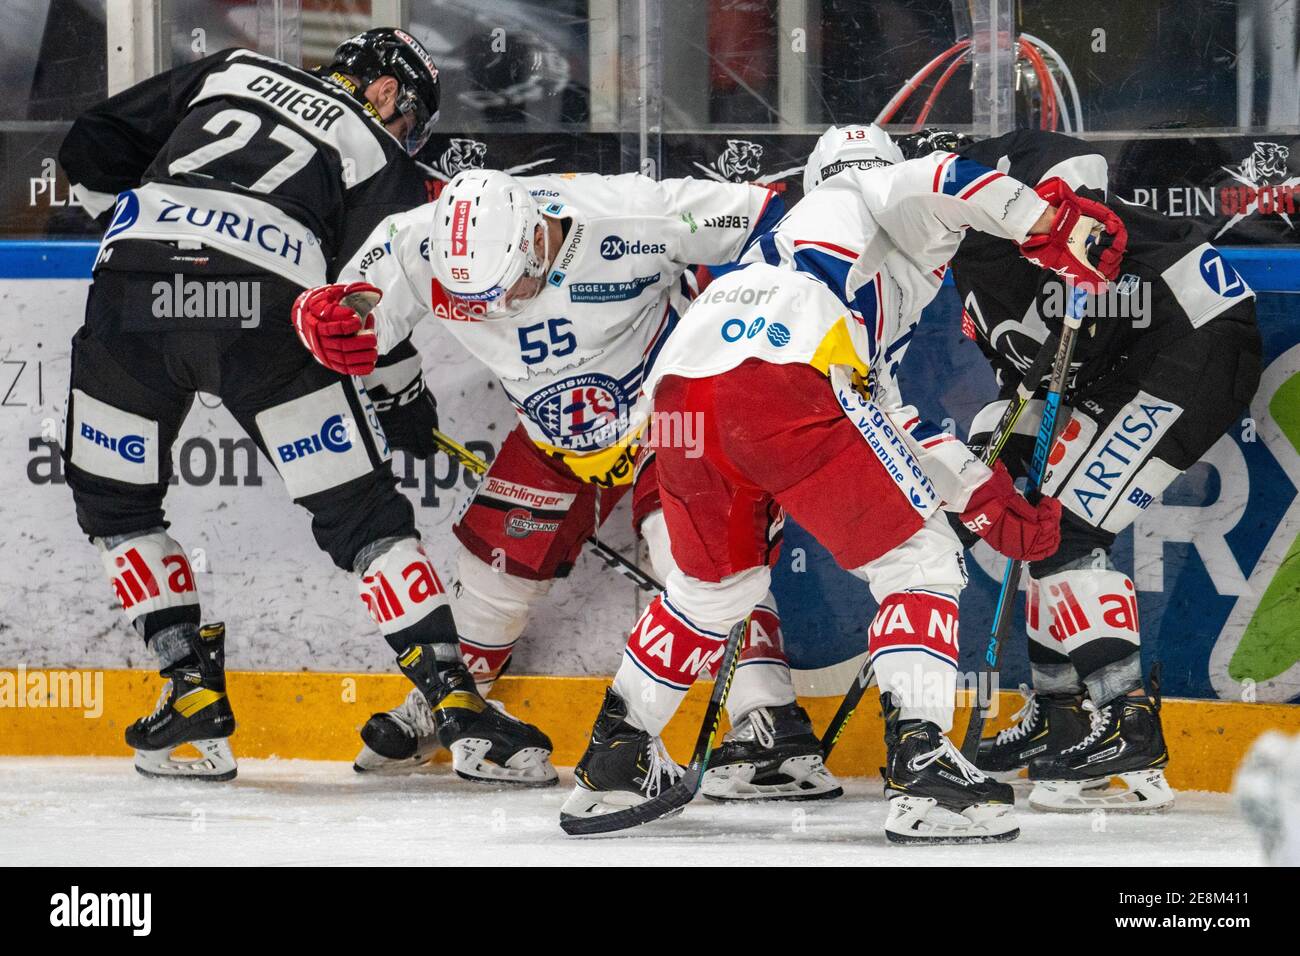 Porza, Corner Arena, National League: HC Lugano - SC, USA. 31st Jan, 2021. Rapperswil-Jona Lakers, from left to right # 27 Alessandro Chiesa (Lugano), # 55 Daniel Vukovic (Lakers) and # 13 Mauro Dufner (Lakers) fight for the puck. Credit: SPP Sport Press Photo. /Alamy Live News Stock Photo